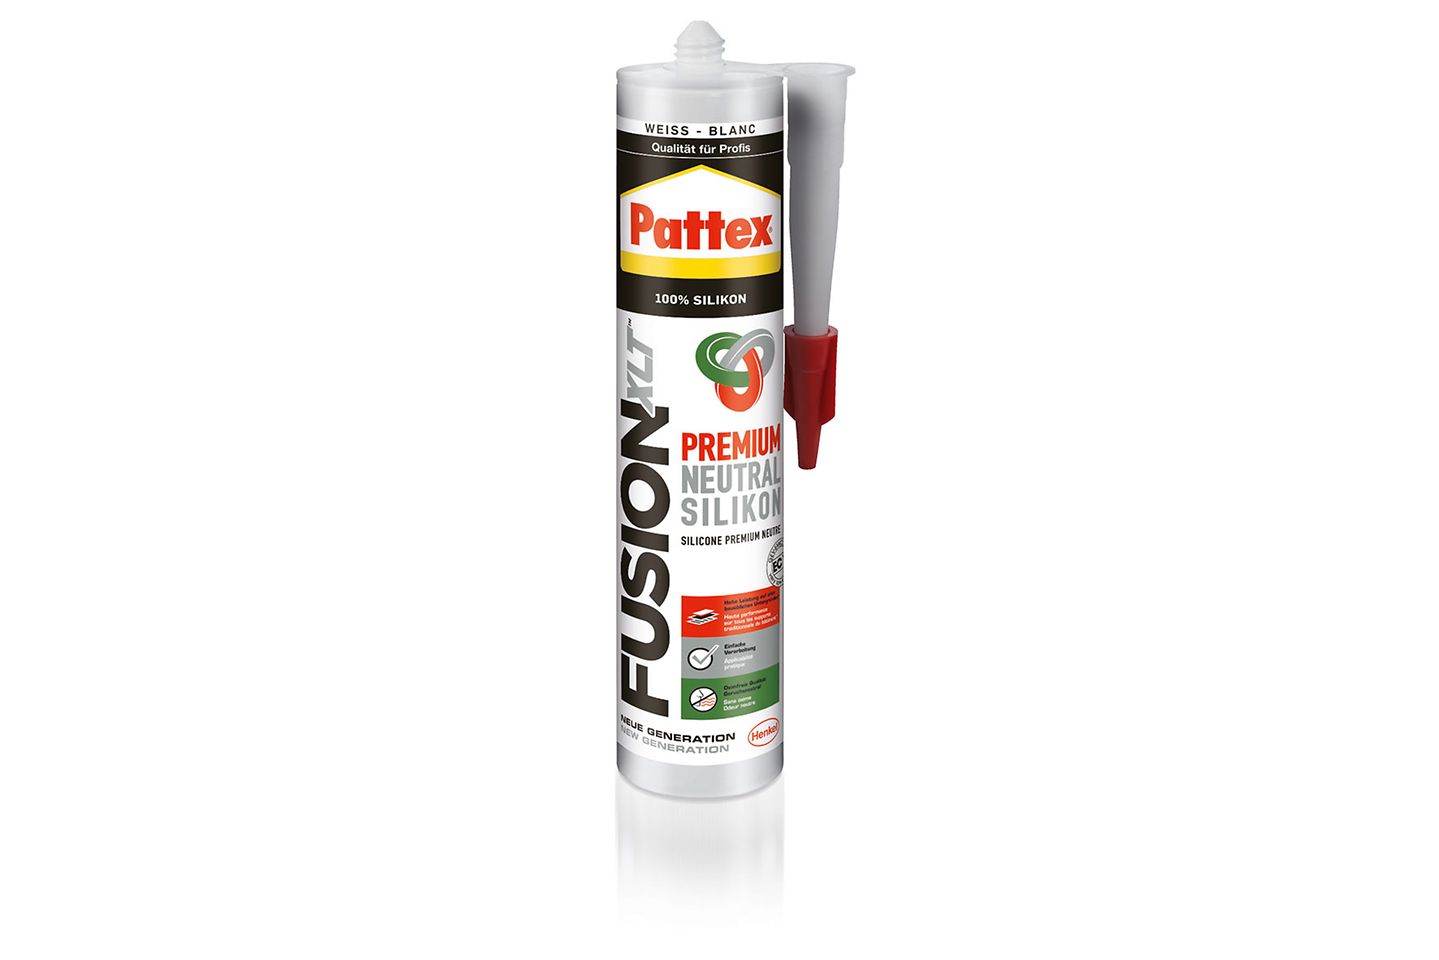 

Pattex FUSIONXLT, the innovative oxime-free technology from Henkel, offers high user safety combined with optimum adhesion on virtually all substrates.